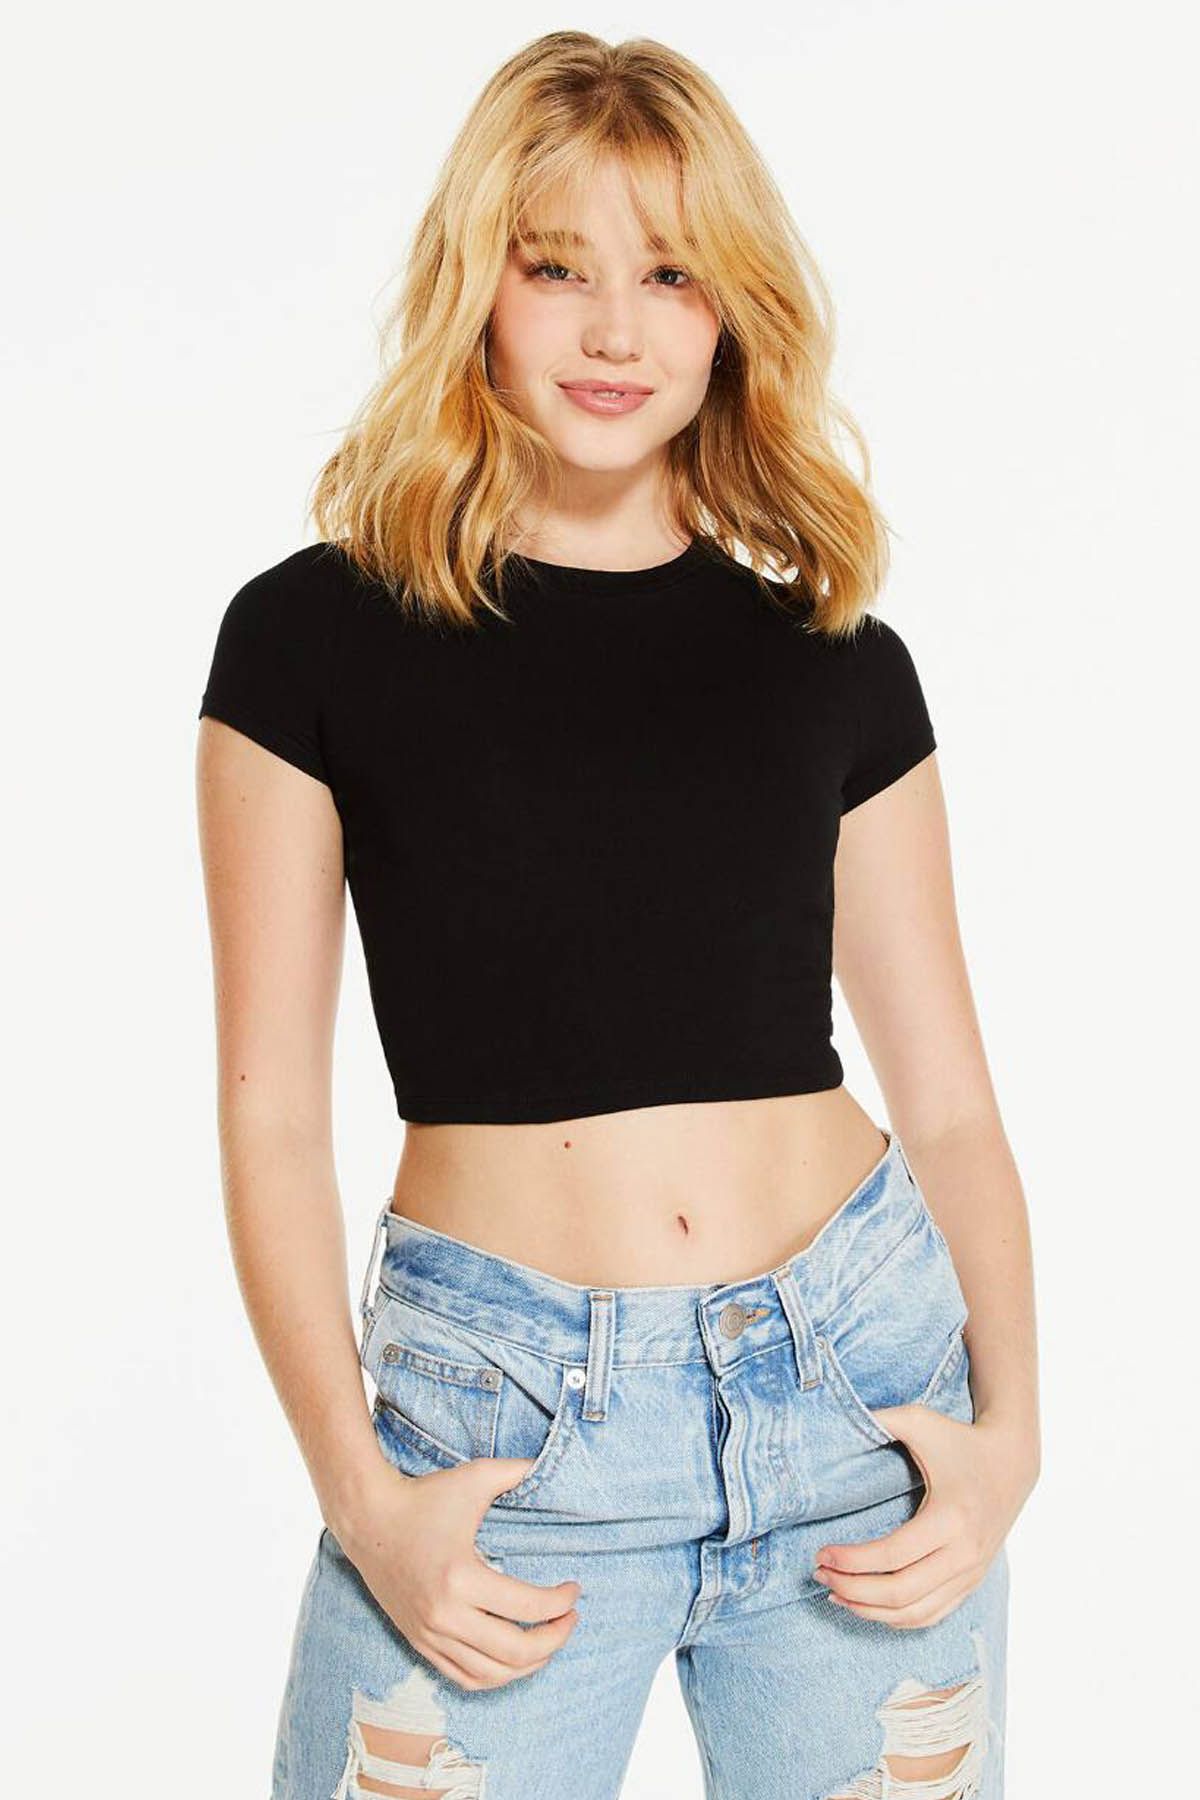 AEROPOSTALE Seriously Soft Cropped Baby Tee Black 7 Women T-Shirts